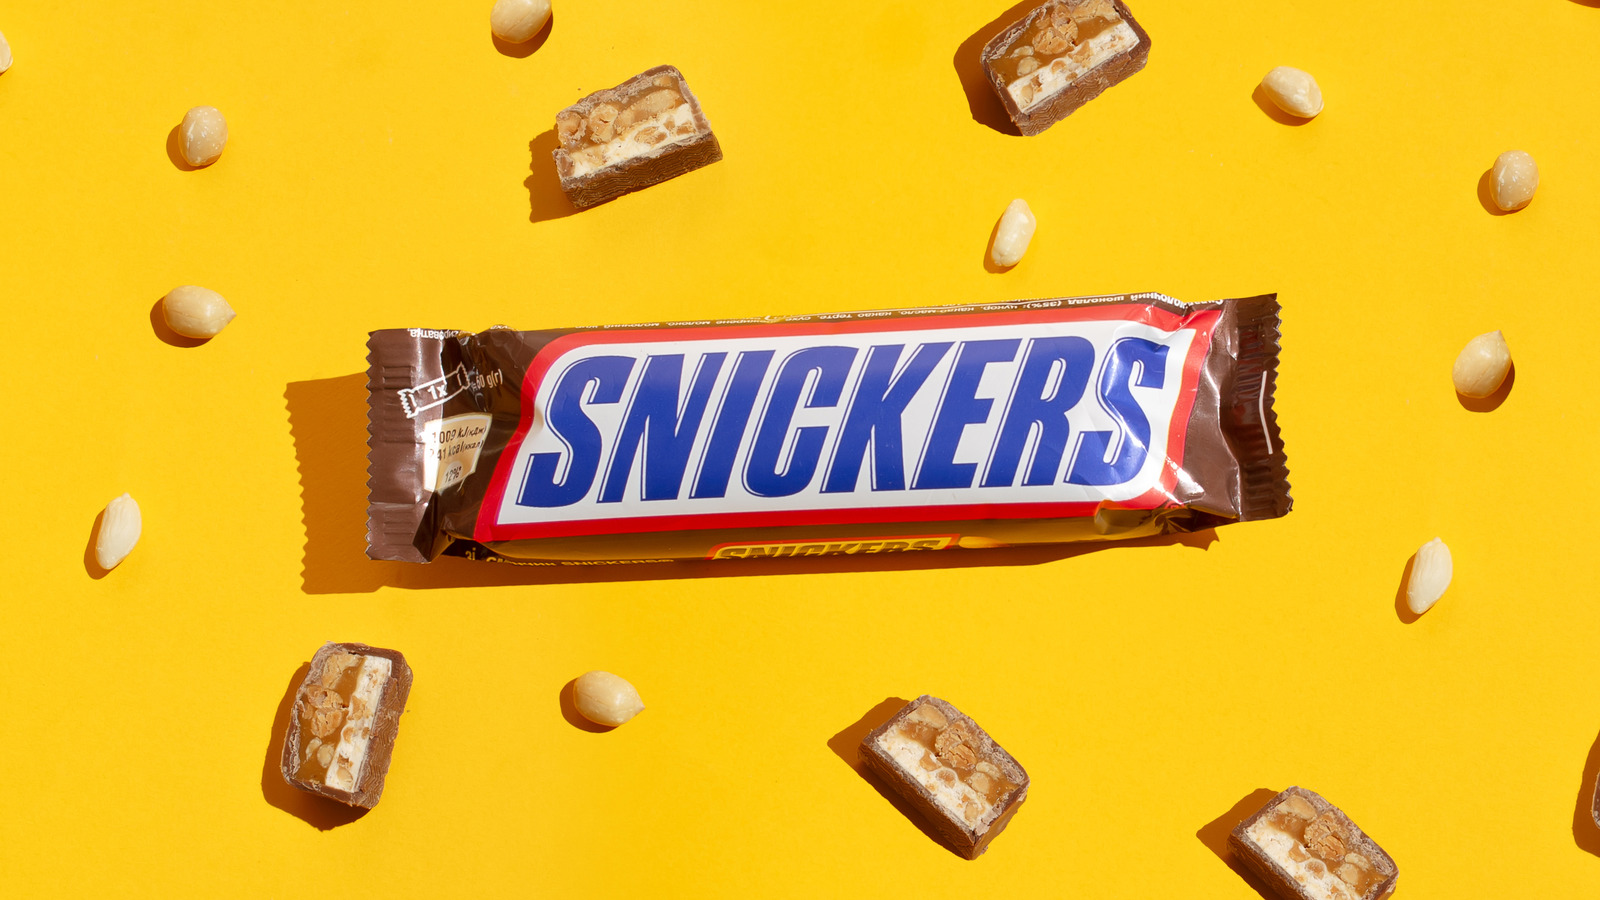 Snickers Is Bringing Back A Fan-Favorite Flavor For The First Time In Years